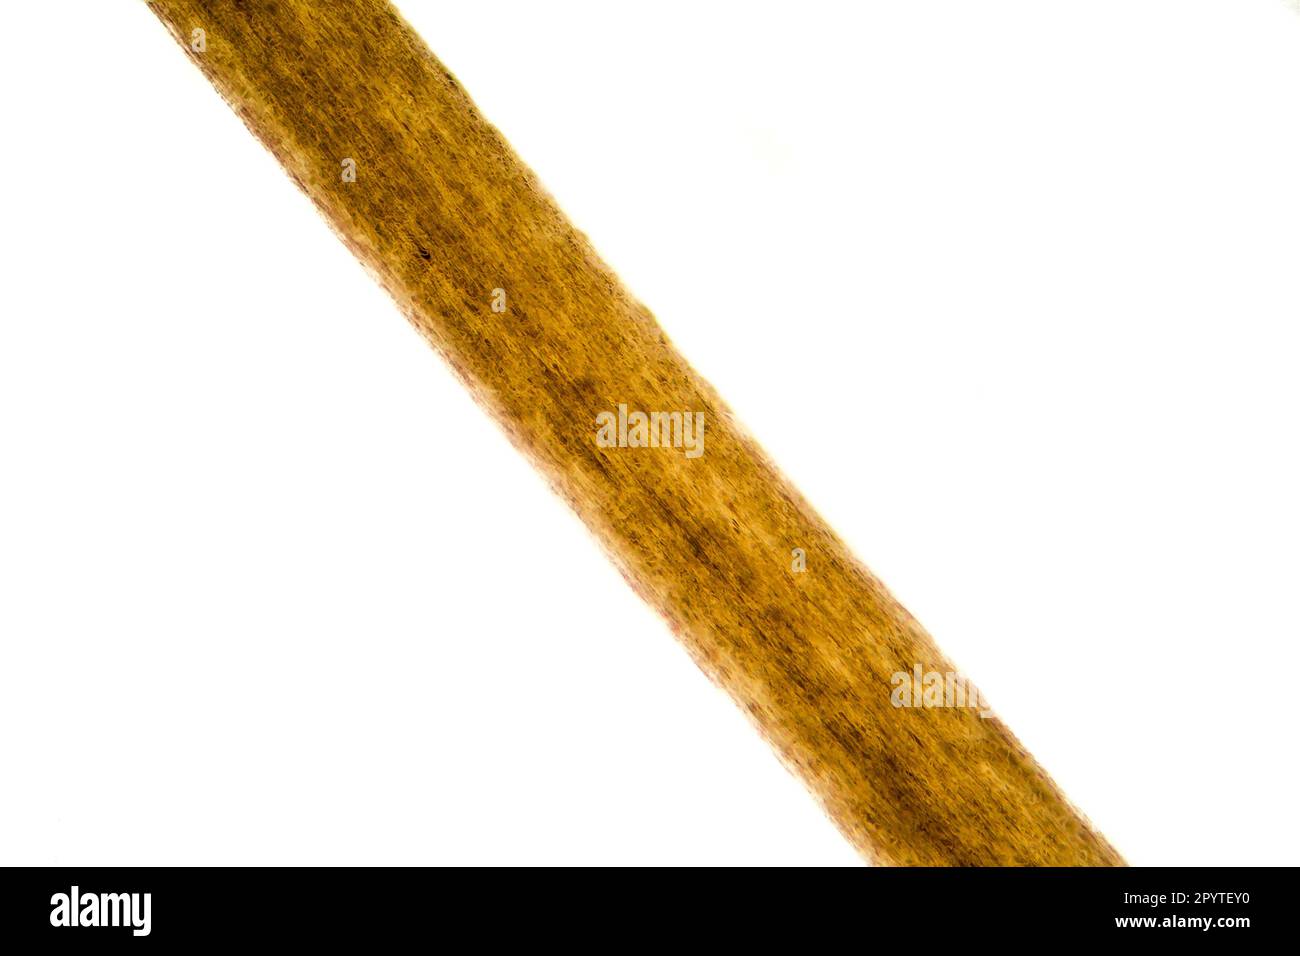 269 Human Hair Microscope Stock Video Footage  4K and HD Video Clips   Shutterstock